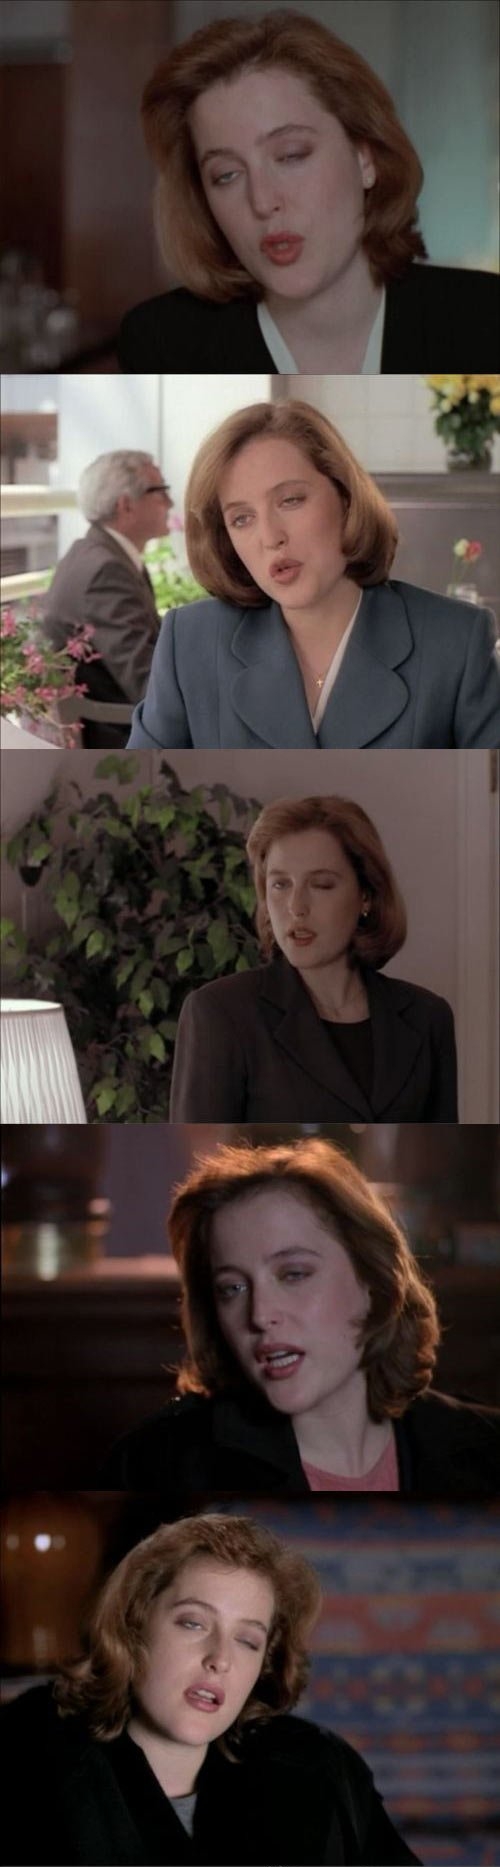 Scully was kind of a derp...